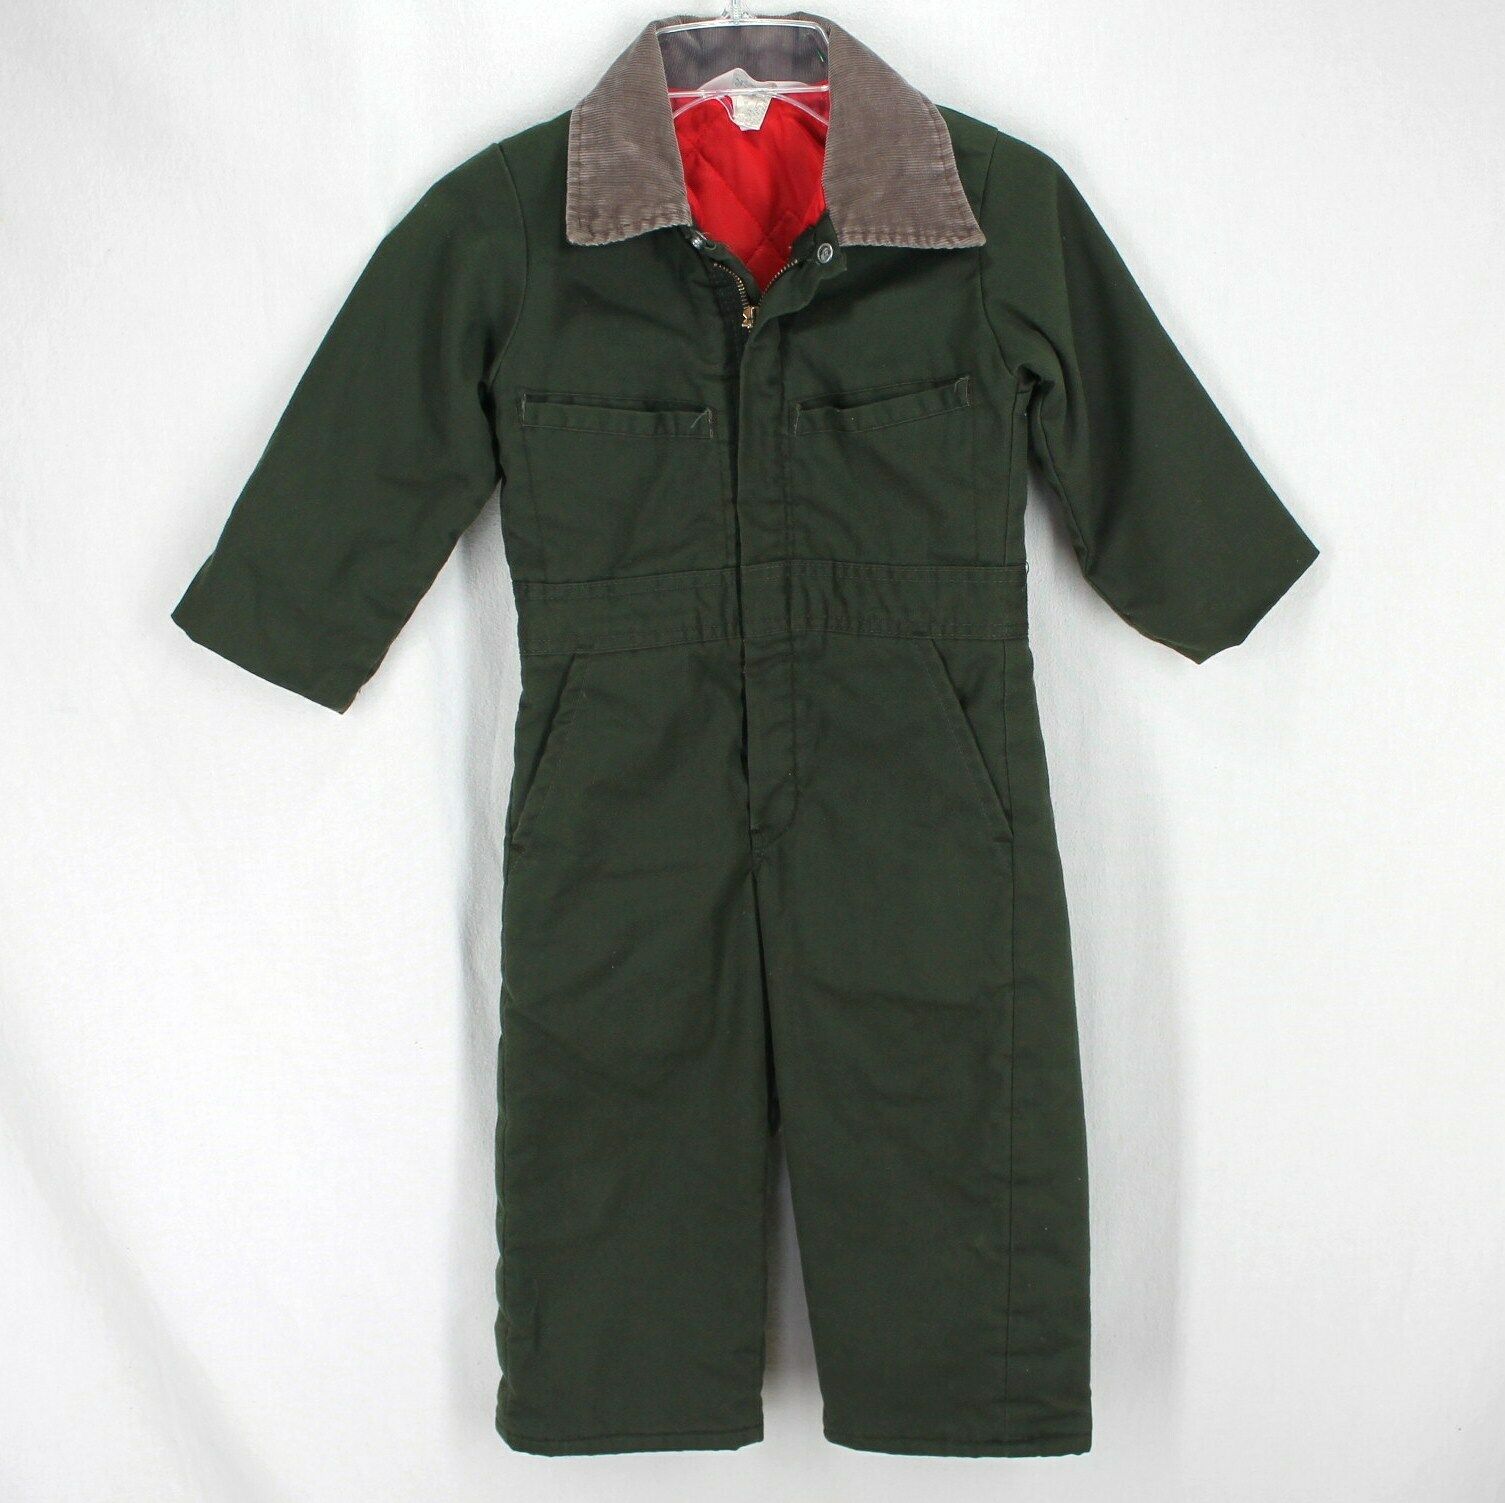 Vintage Key Imperial Coveralls Kids Boys Sz 4 Olive Green Insulated Made In Usa